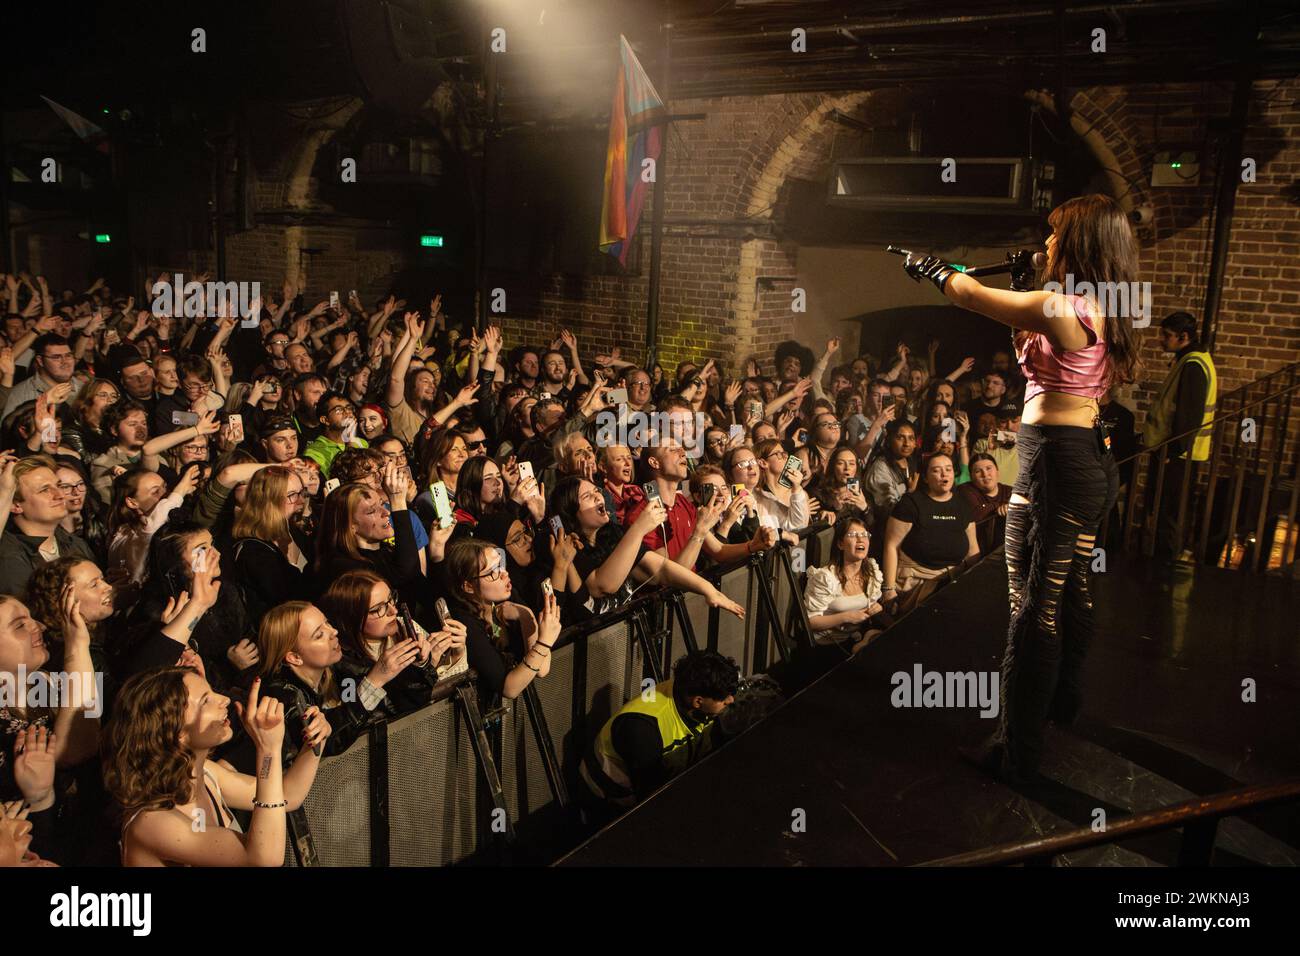 Alessandra Mele performs in London at a sold out Heaven Nightclub 16/02/24 Stock Photo